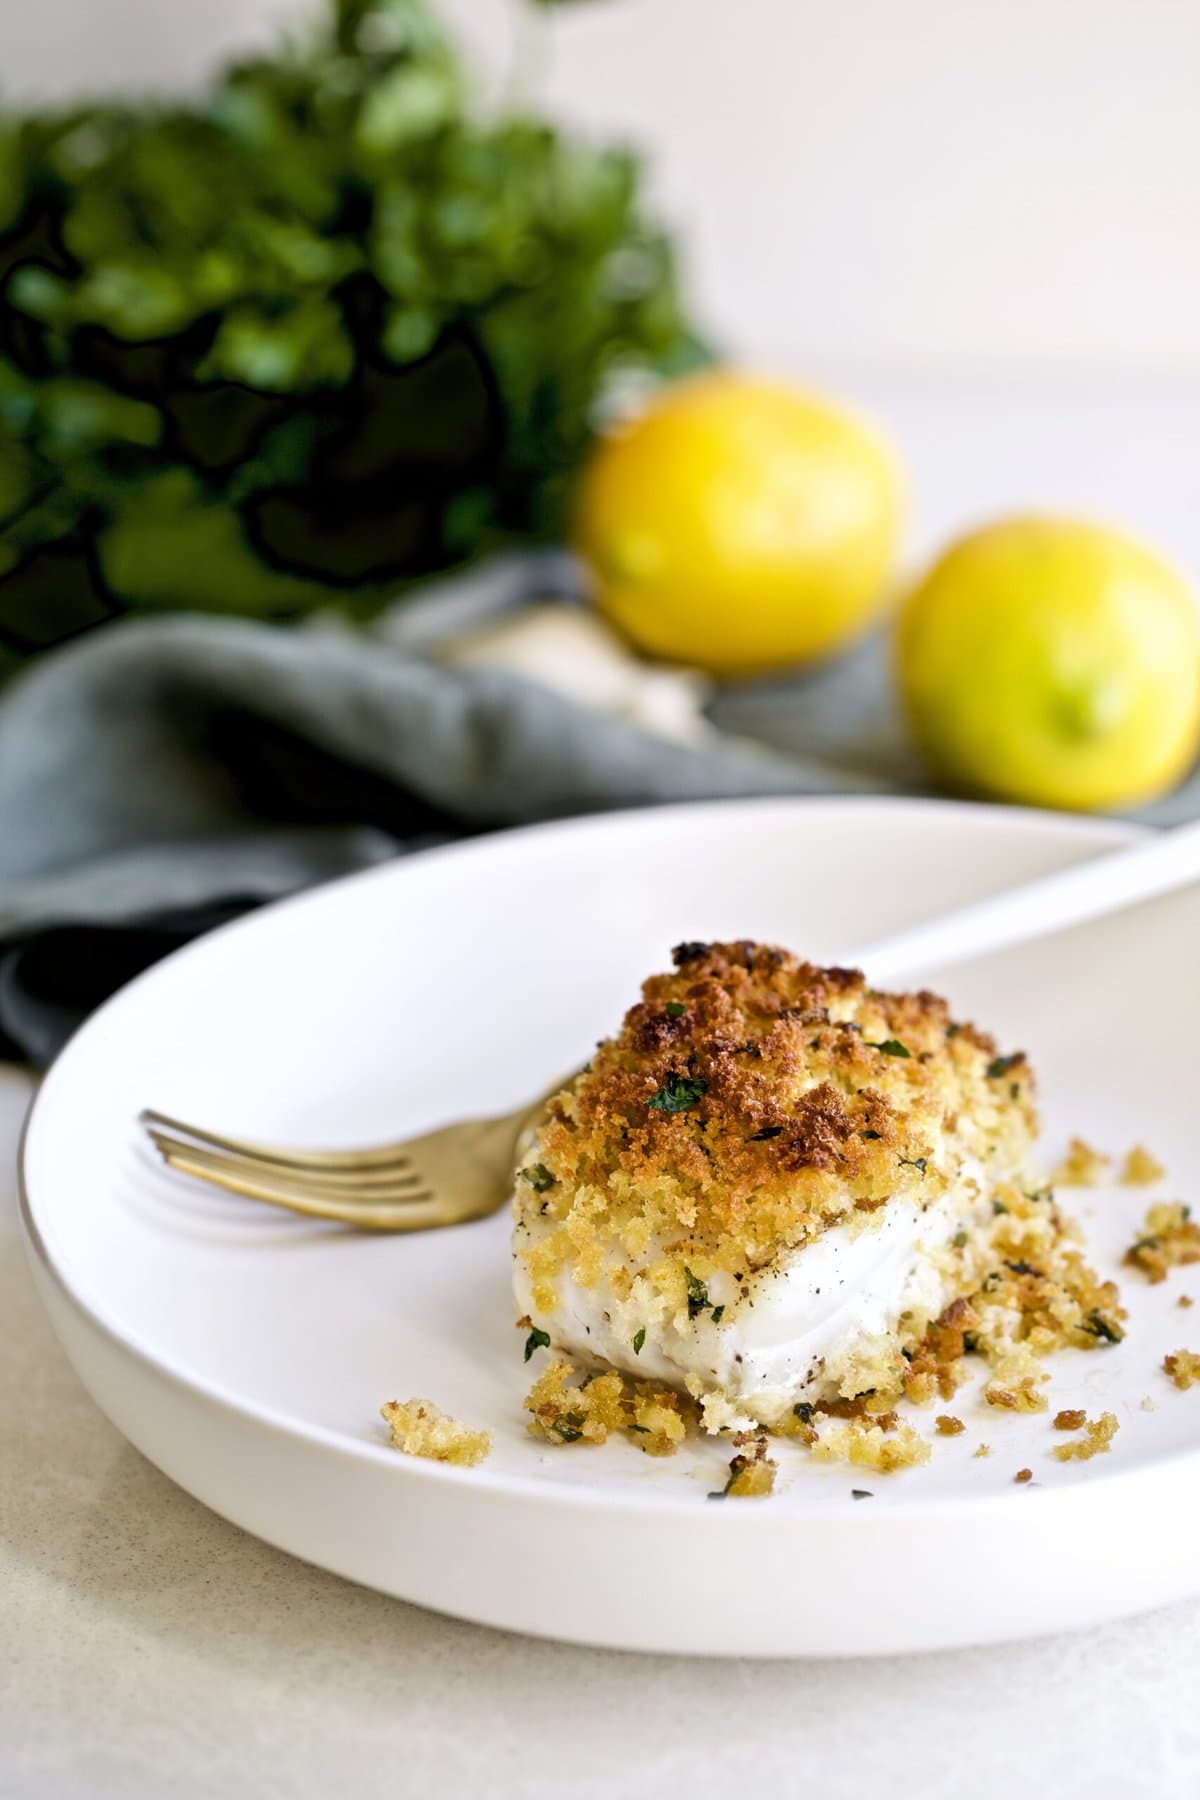 Crispy Baked Cod with Panko Recipe on a plate with lemons, parsley, and garlic in the background